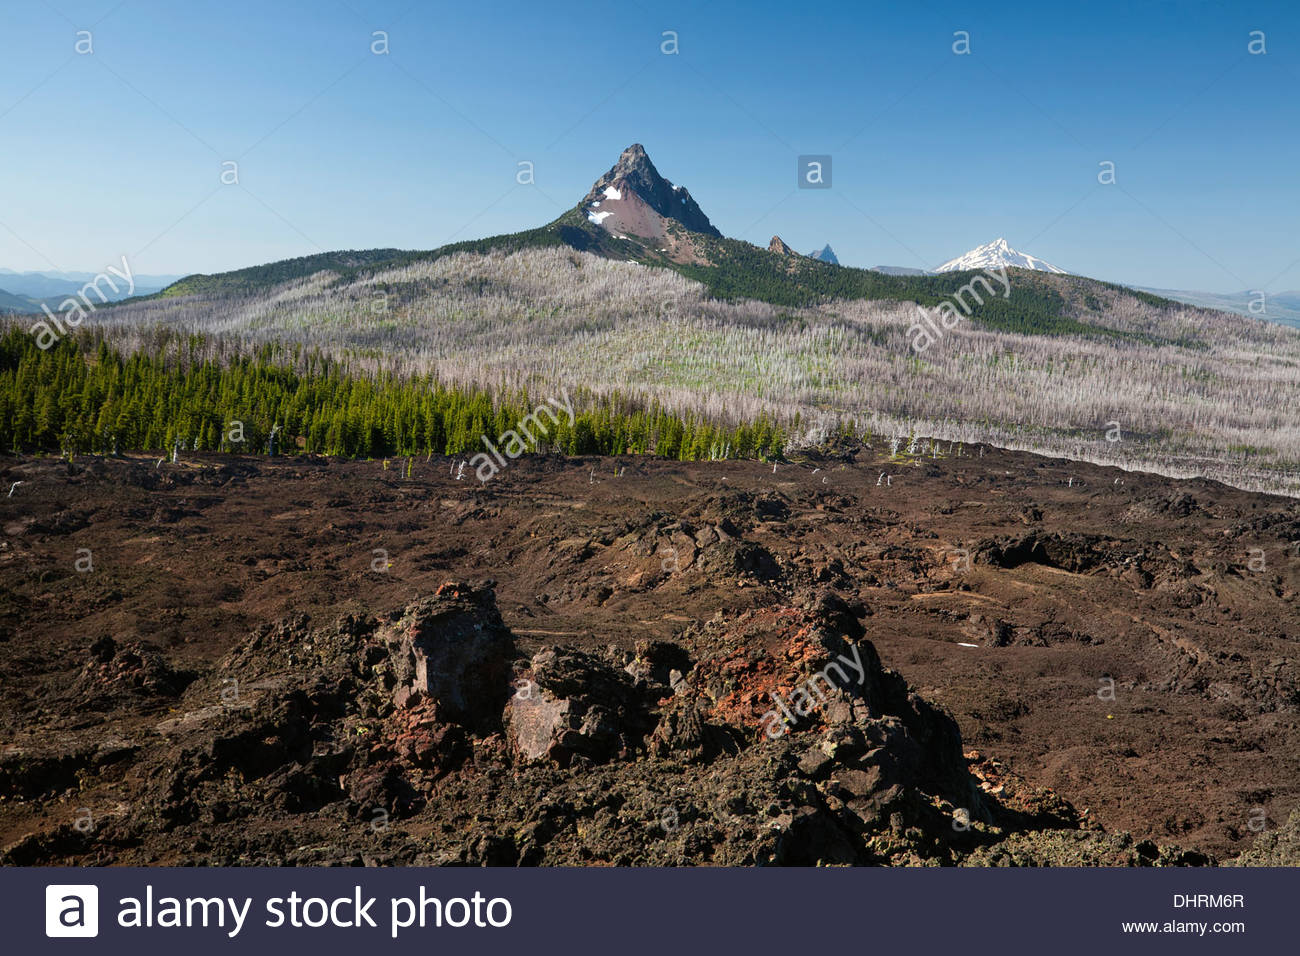 Amazing Mount Three Fingered Jack Pictures & Backgrounds